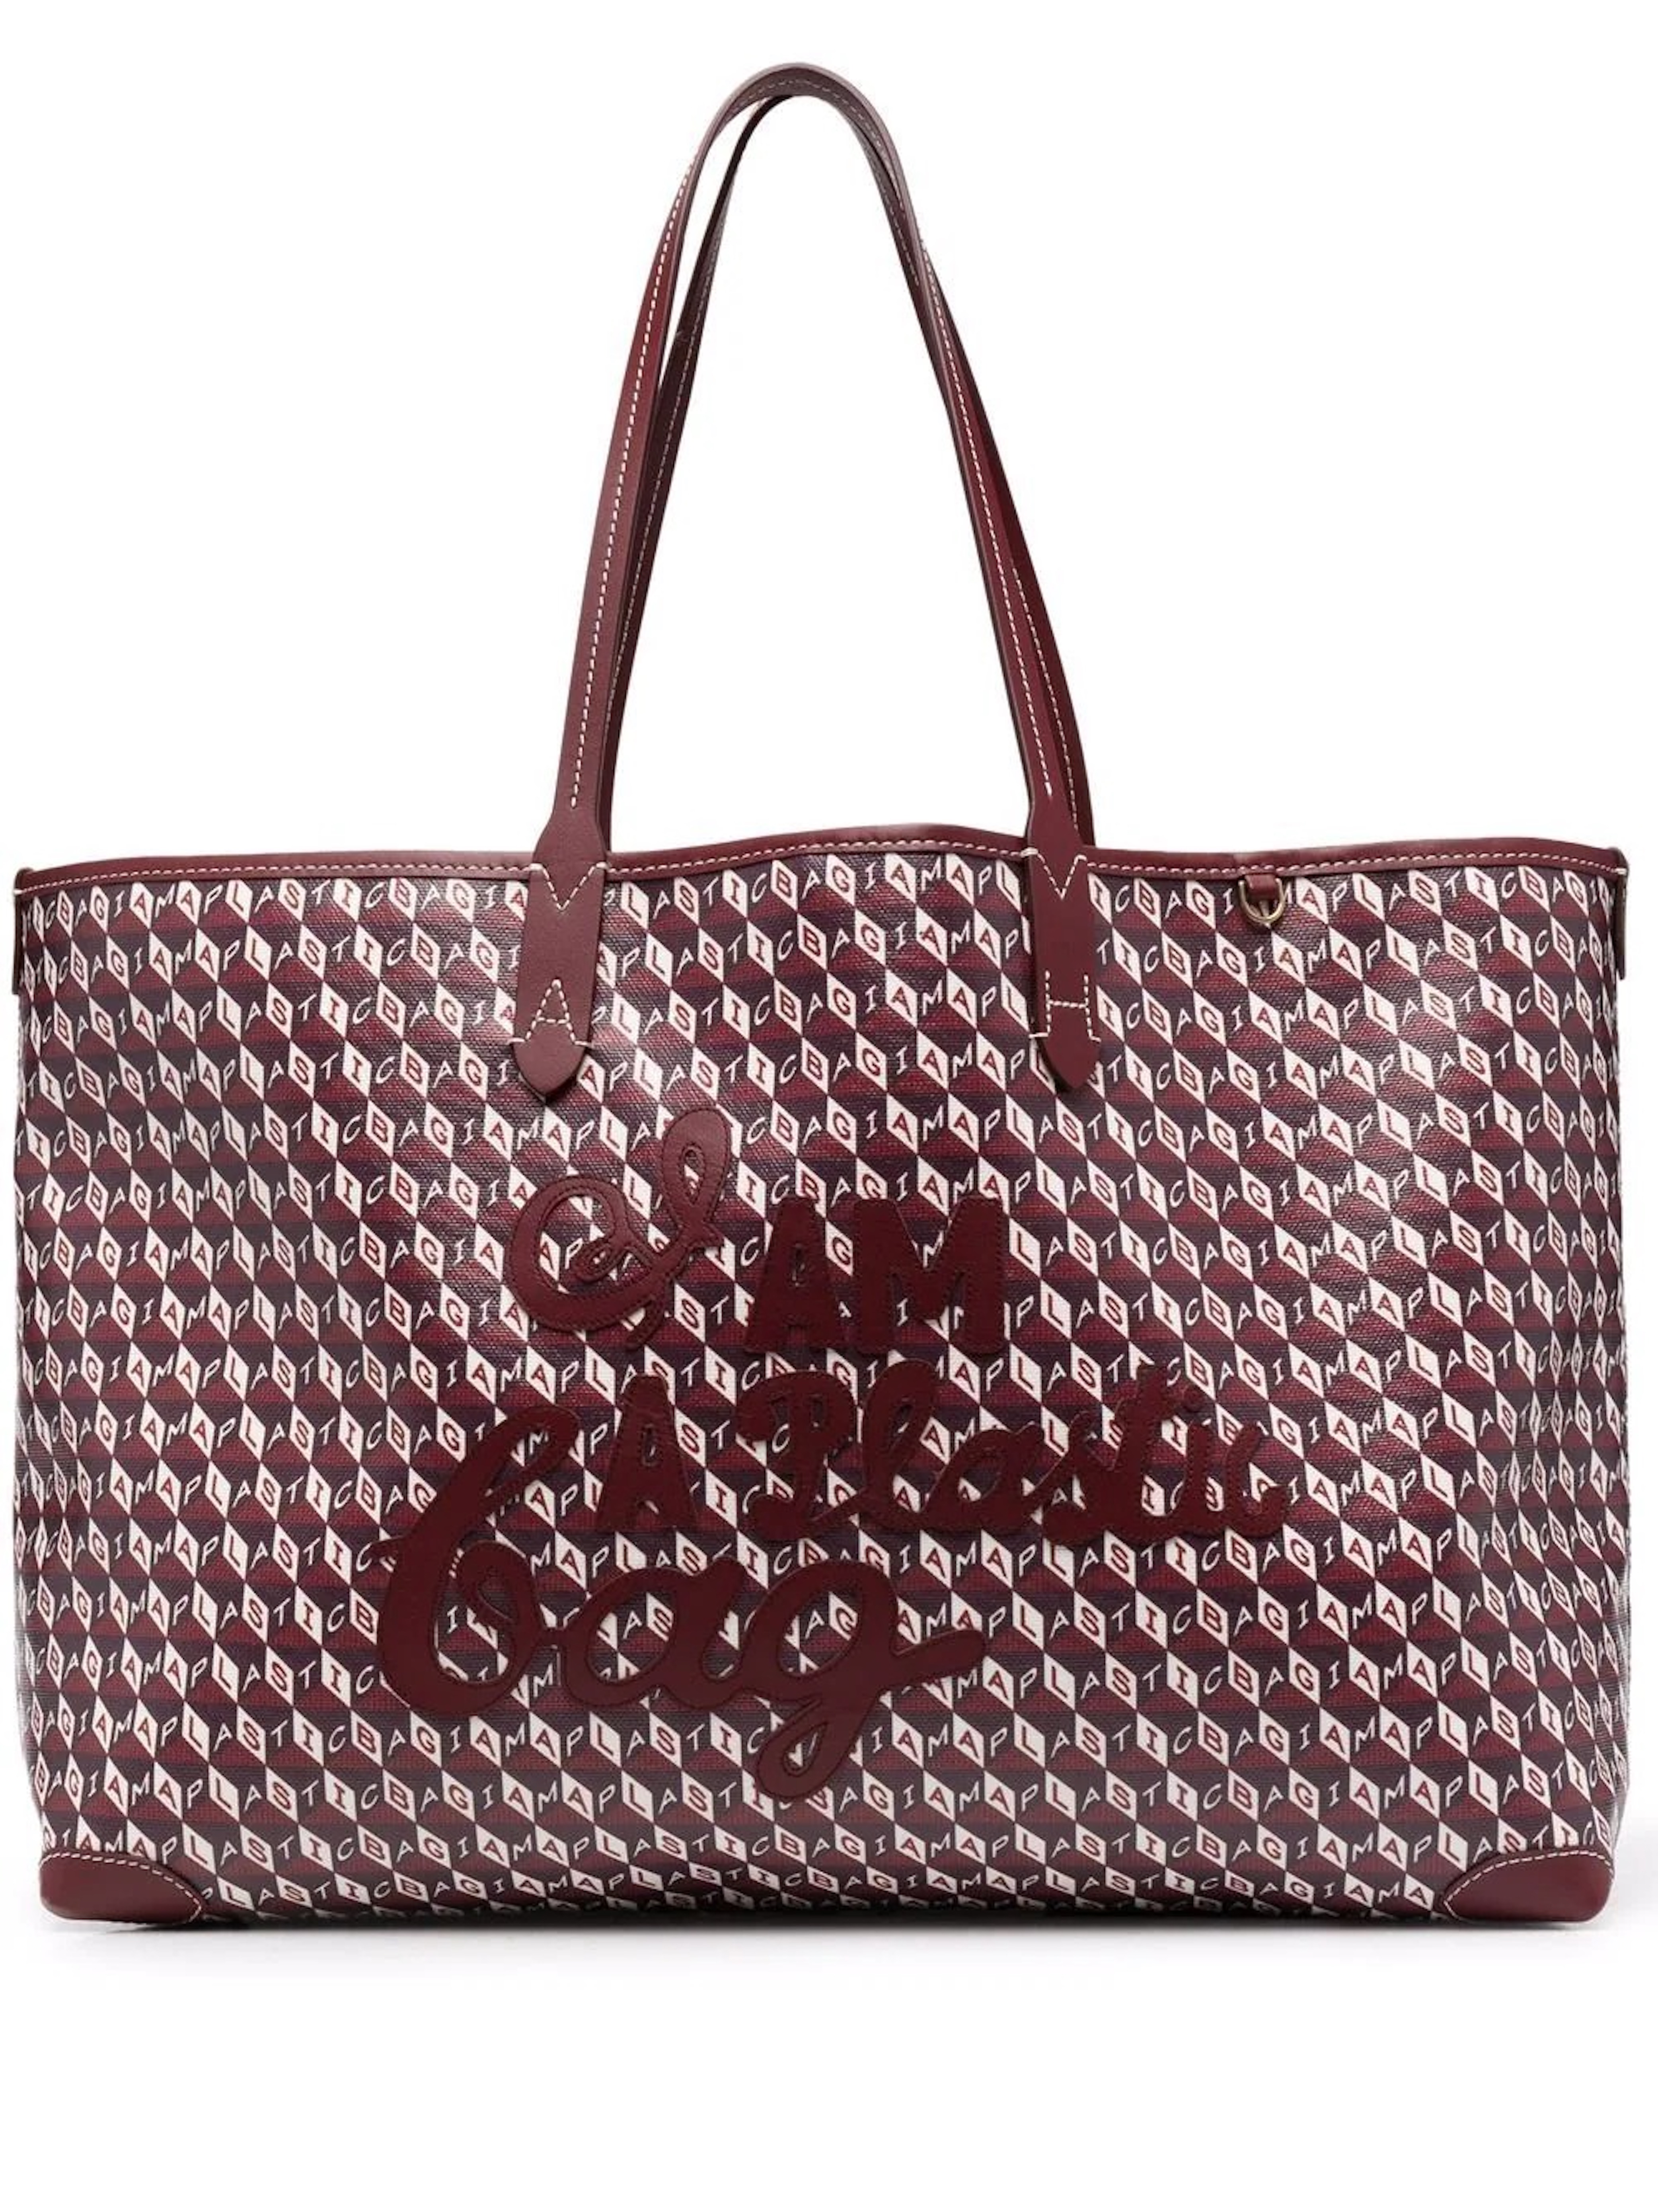 Plastic Mesh Tote Bags with Embroidery Part I - Advanced